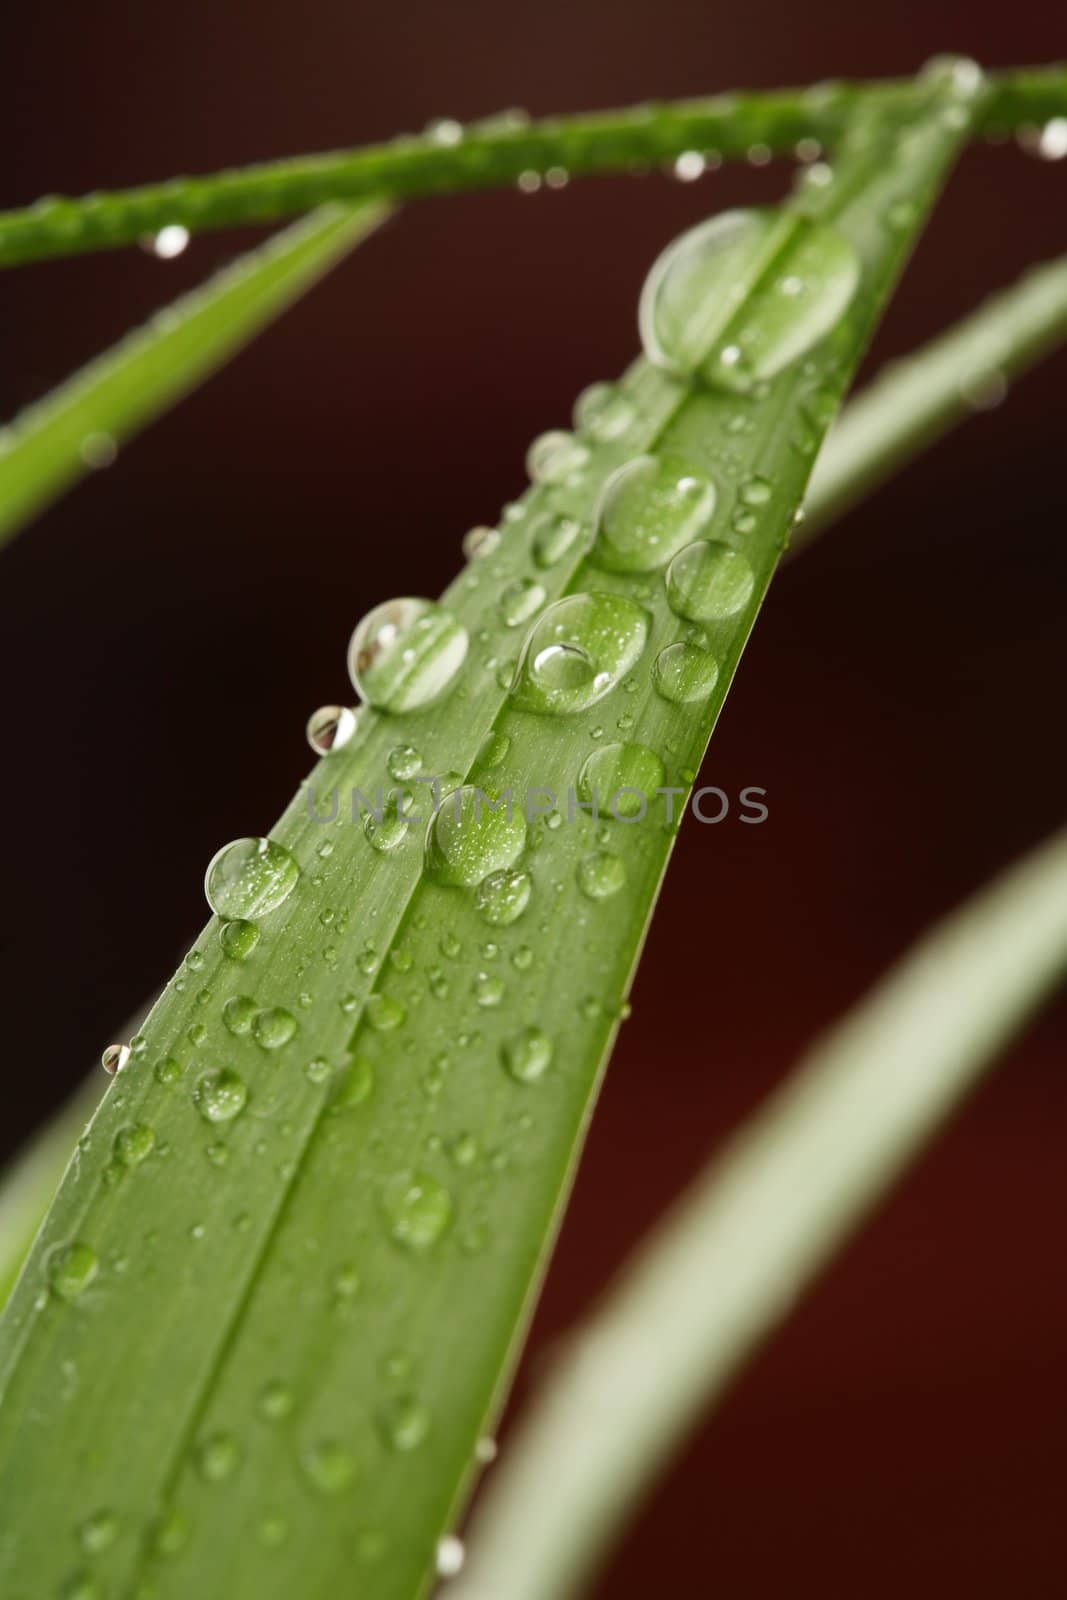 Droplets on a leaf by Stocksnapper